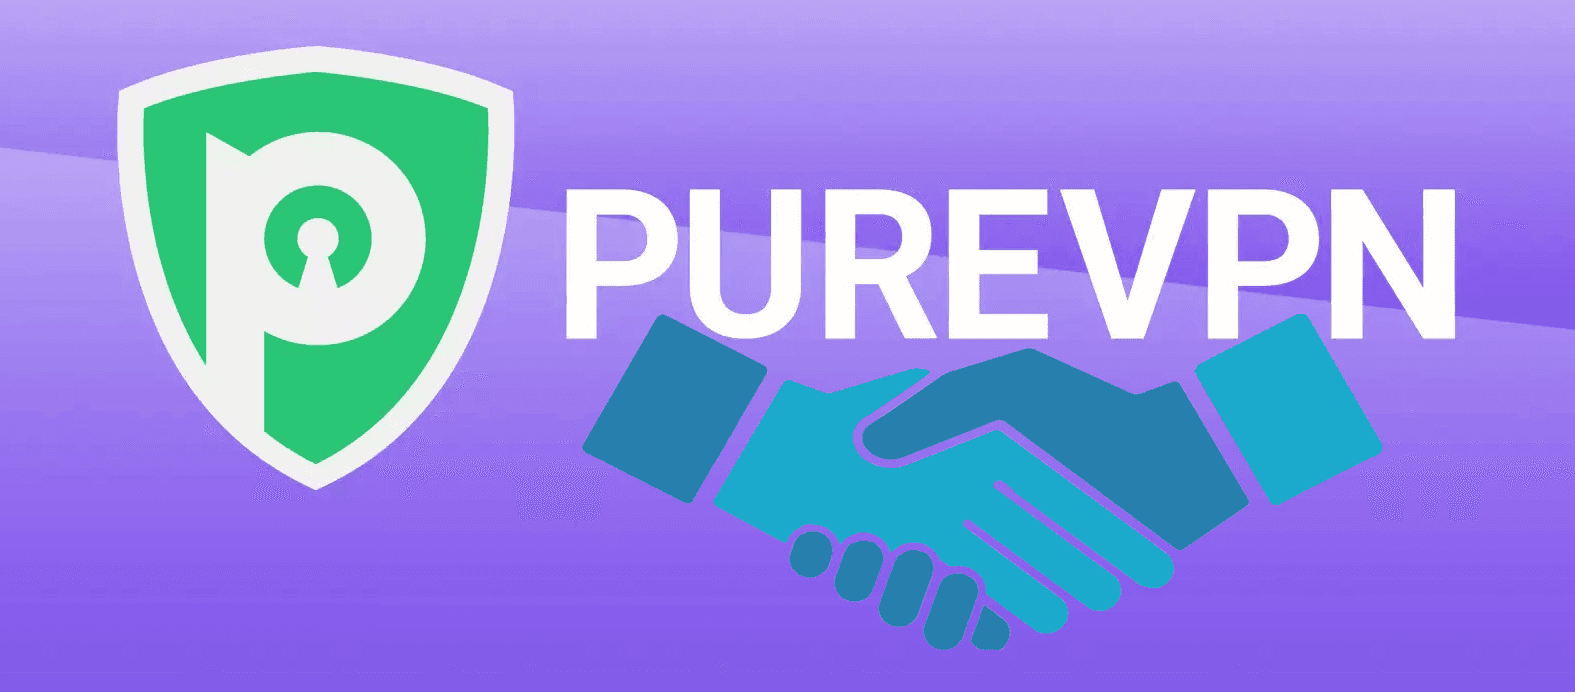 PureVPN has many security features amongst which Split Tunneling